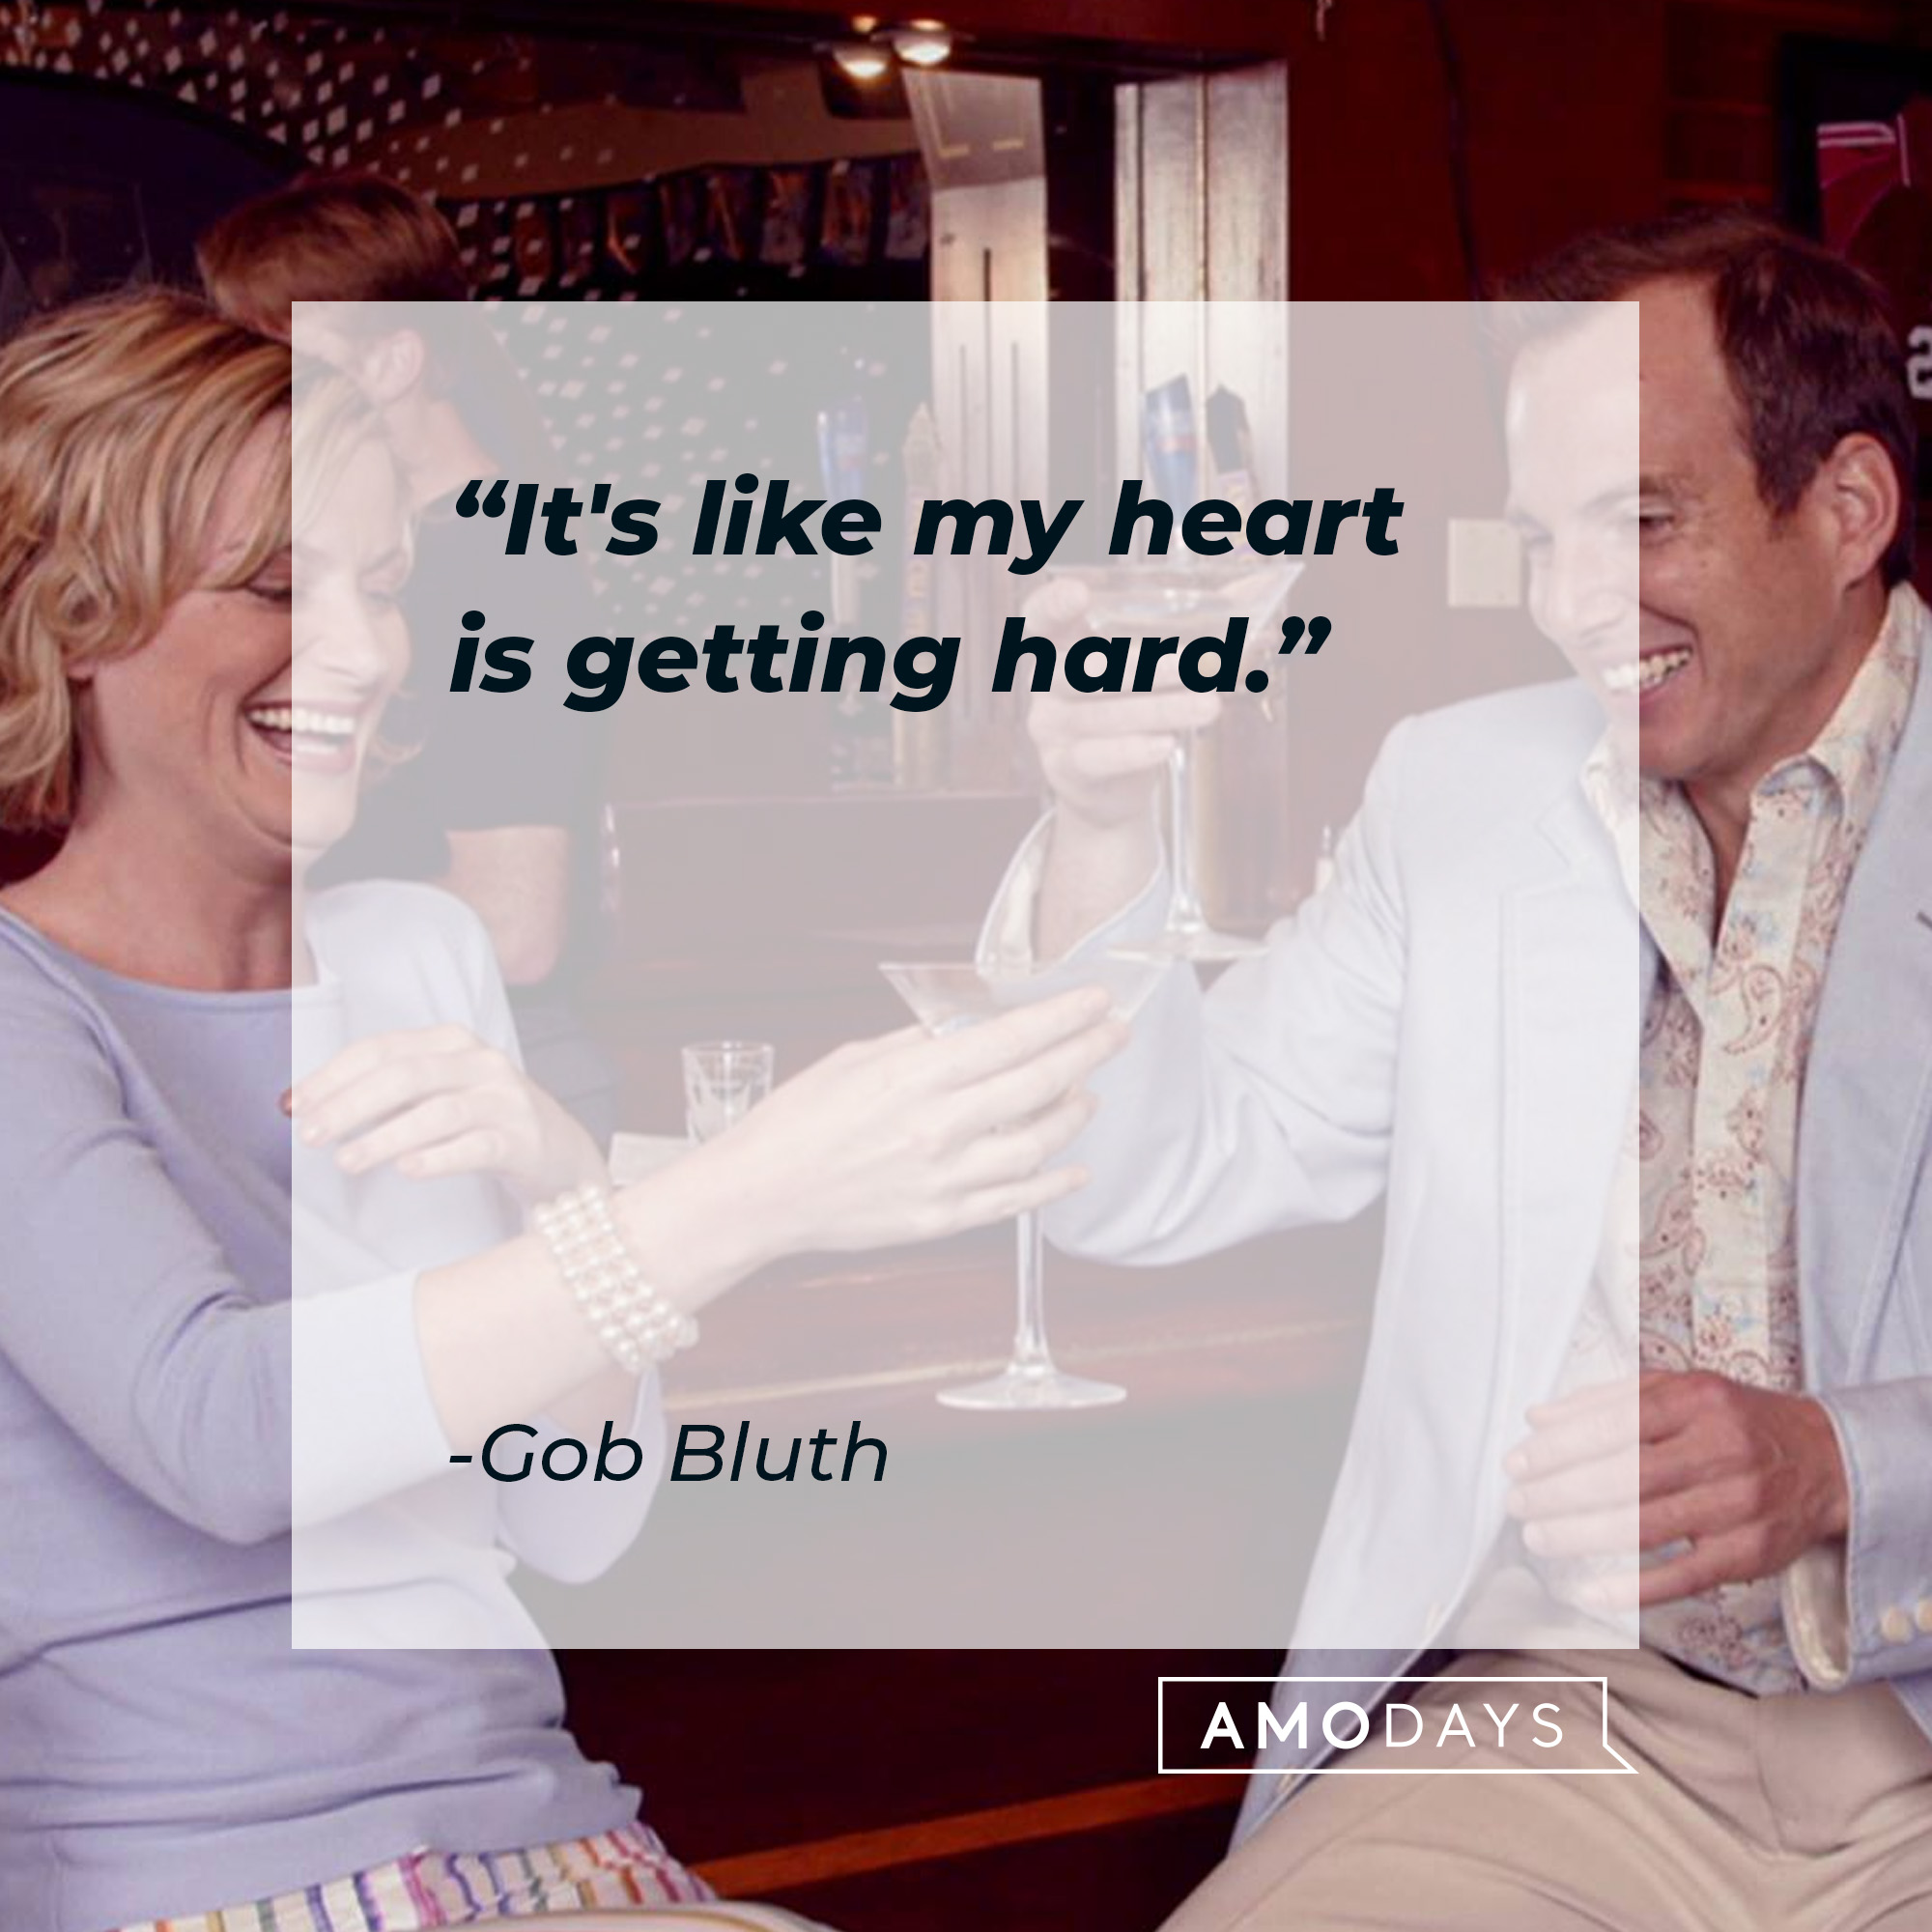 Gob Bluth's quote: "It's like my heart is getting hard." | Source: facebook.com/ArrestedDevelopment